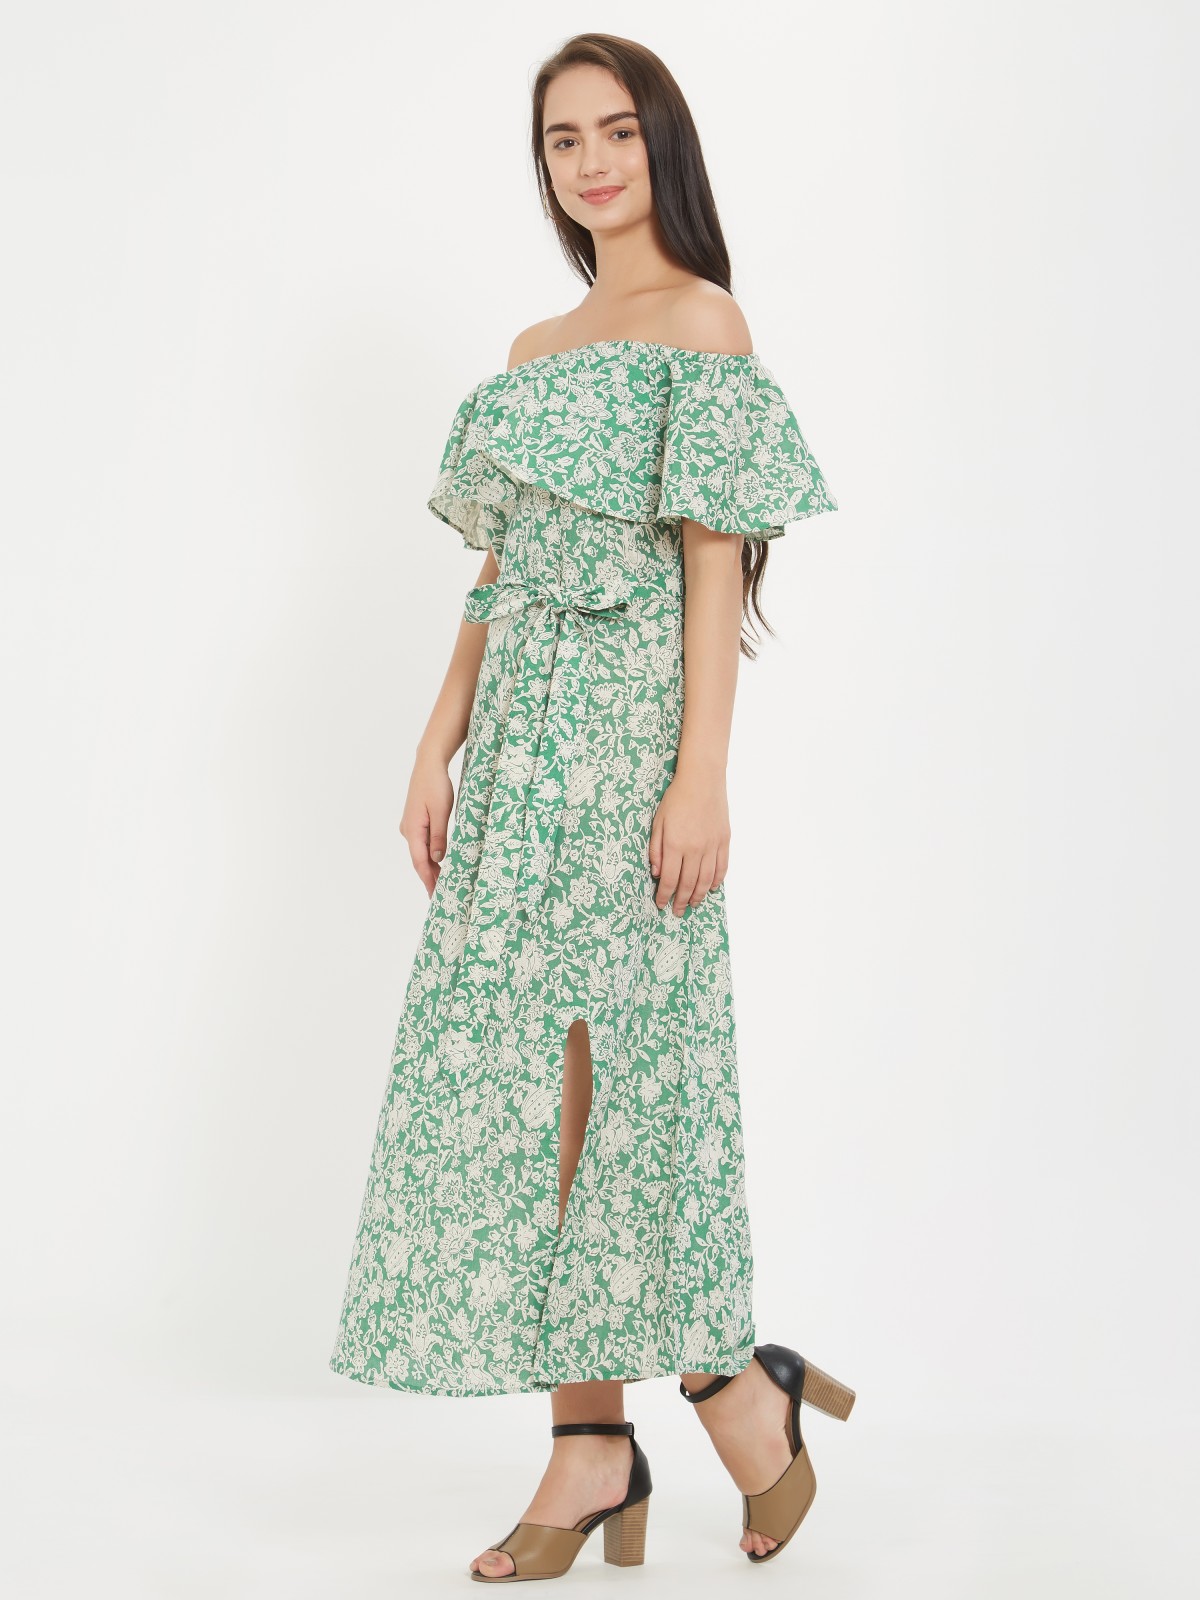 Light Green Floral Printed Off Shoulder Cotton Linen One Piece Dress Exclusive